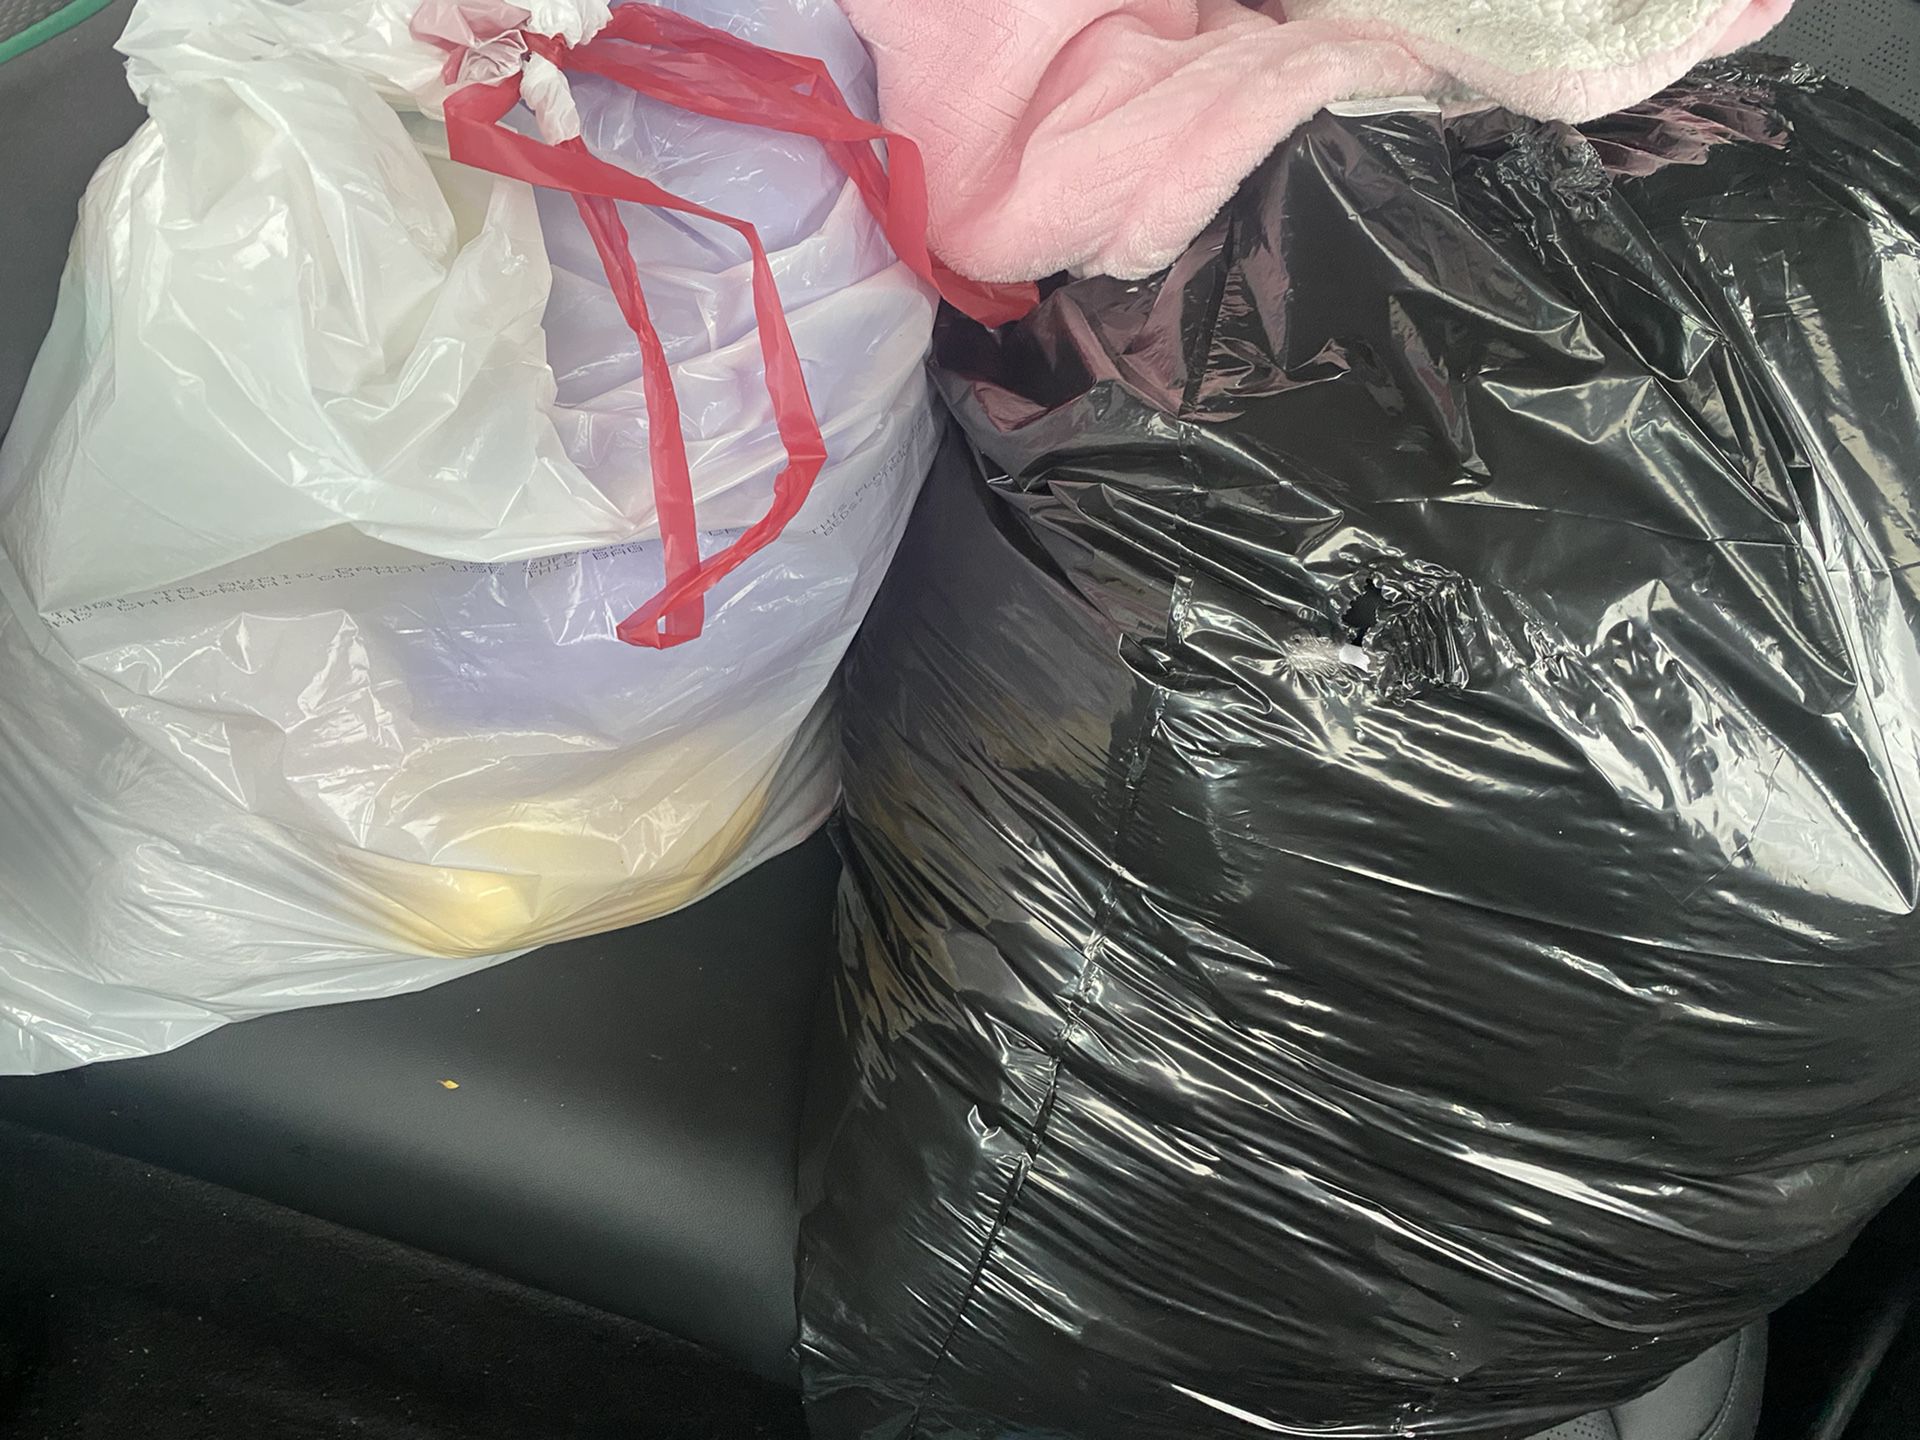 Free Bag Of Clothes And Stuffed Animals 